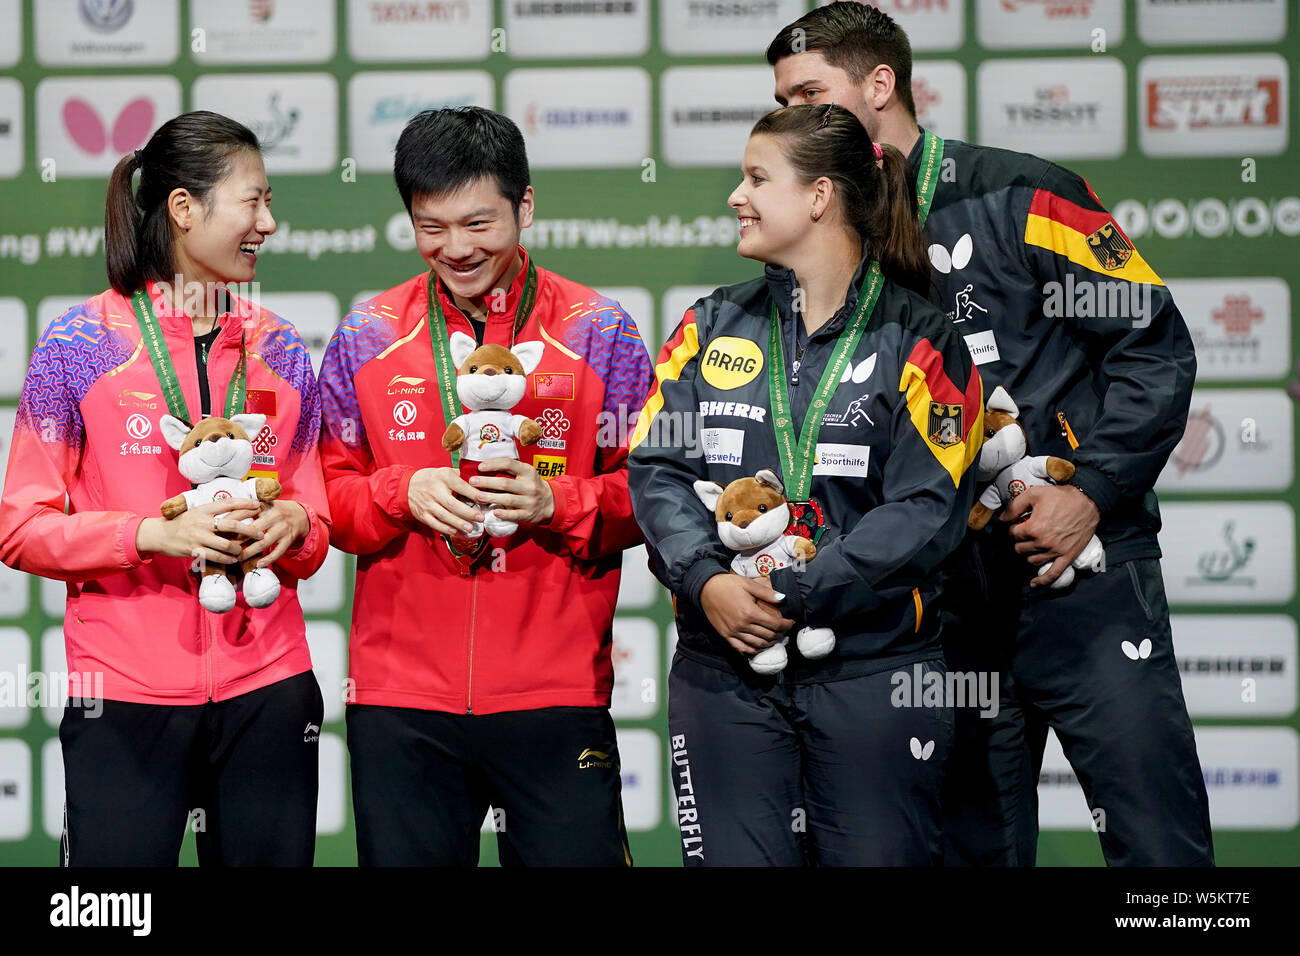 Ding Ning and Fan Zhendong of China, left, and Patrick Franziska and Petrissa Solja of Germany pose with their trophies after winning the thrid place Stock Photo